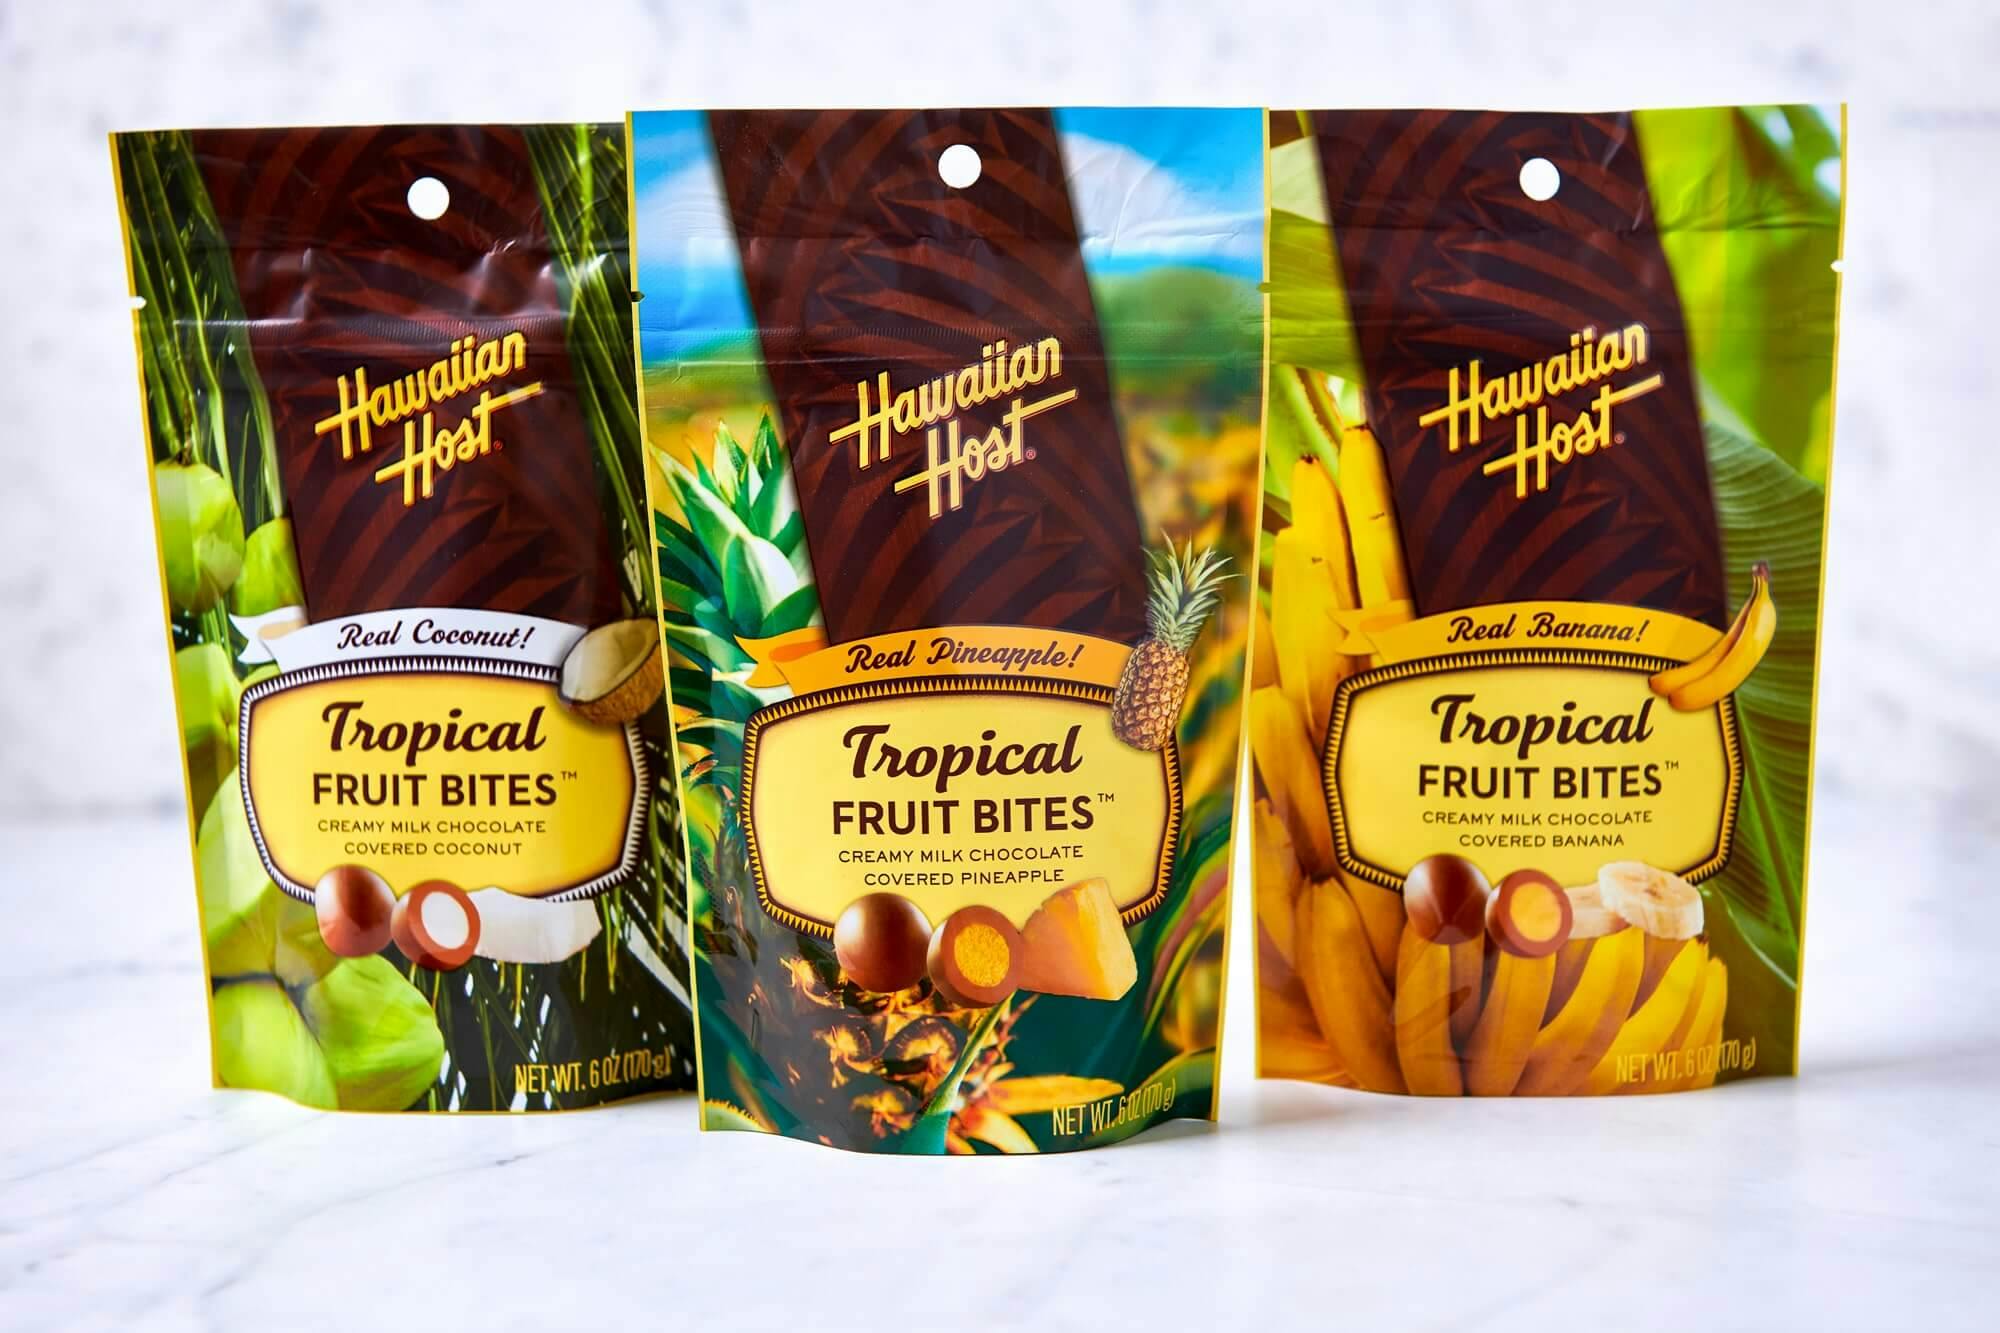 The design for the Tropical Fruit Bites packaging is displayed on Fruit Bite bags: Coconut, Pineapple, and Banana.